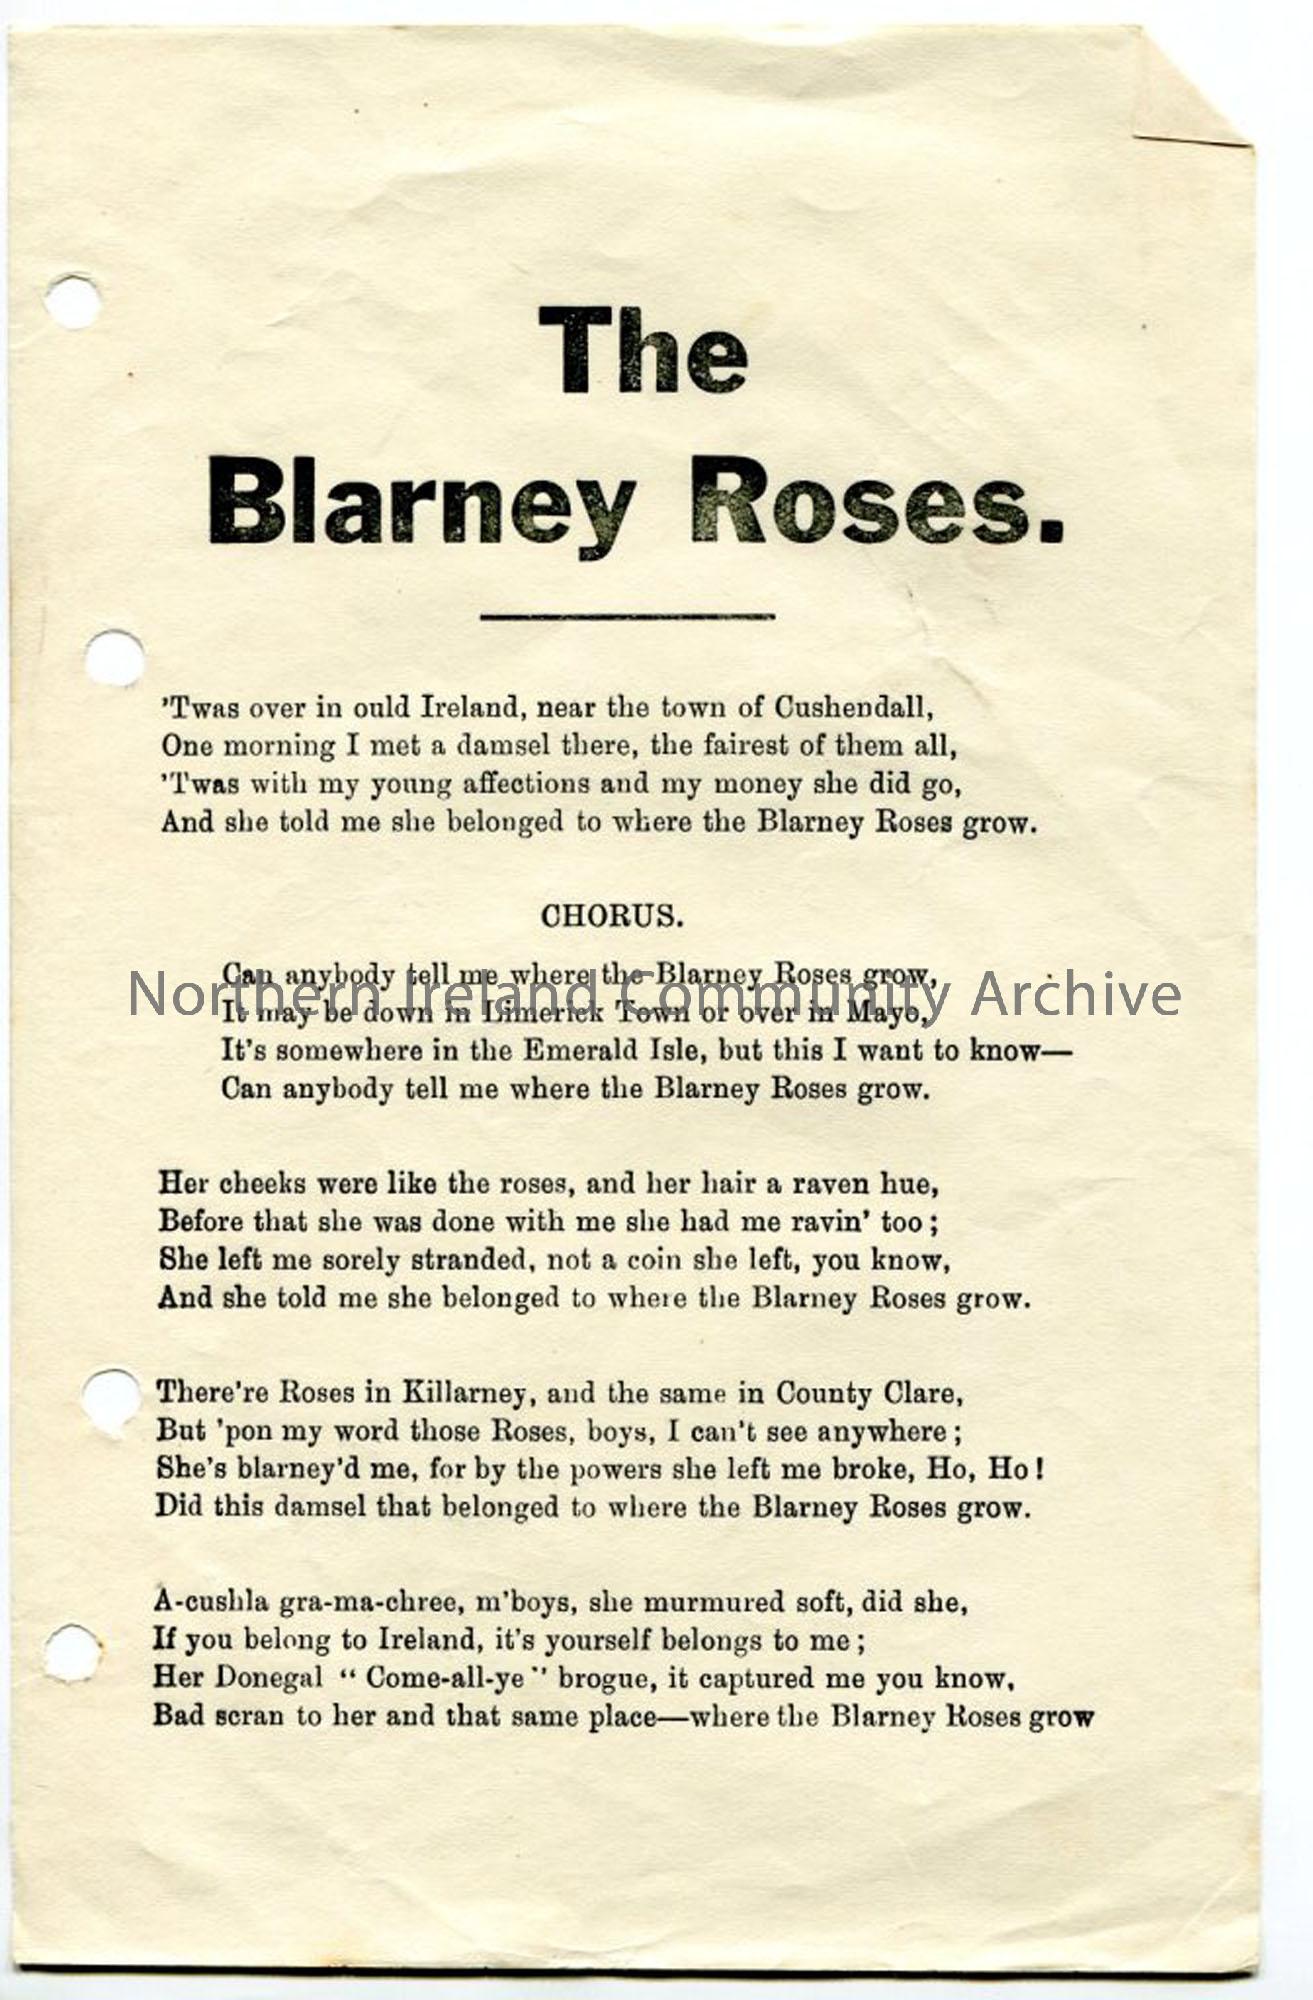 ‘The Blarney Roses’